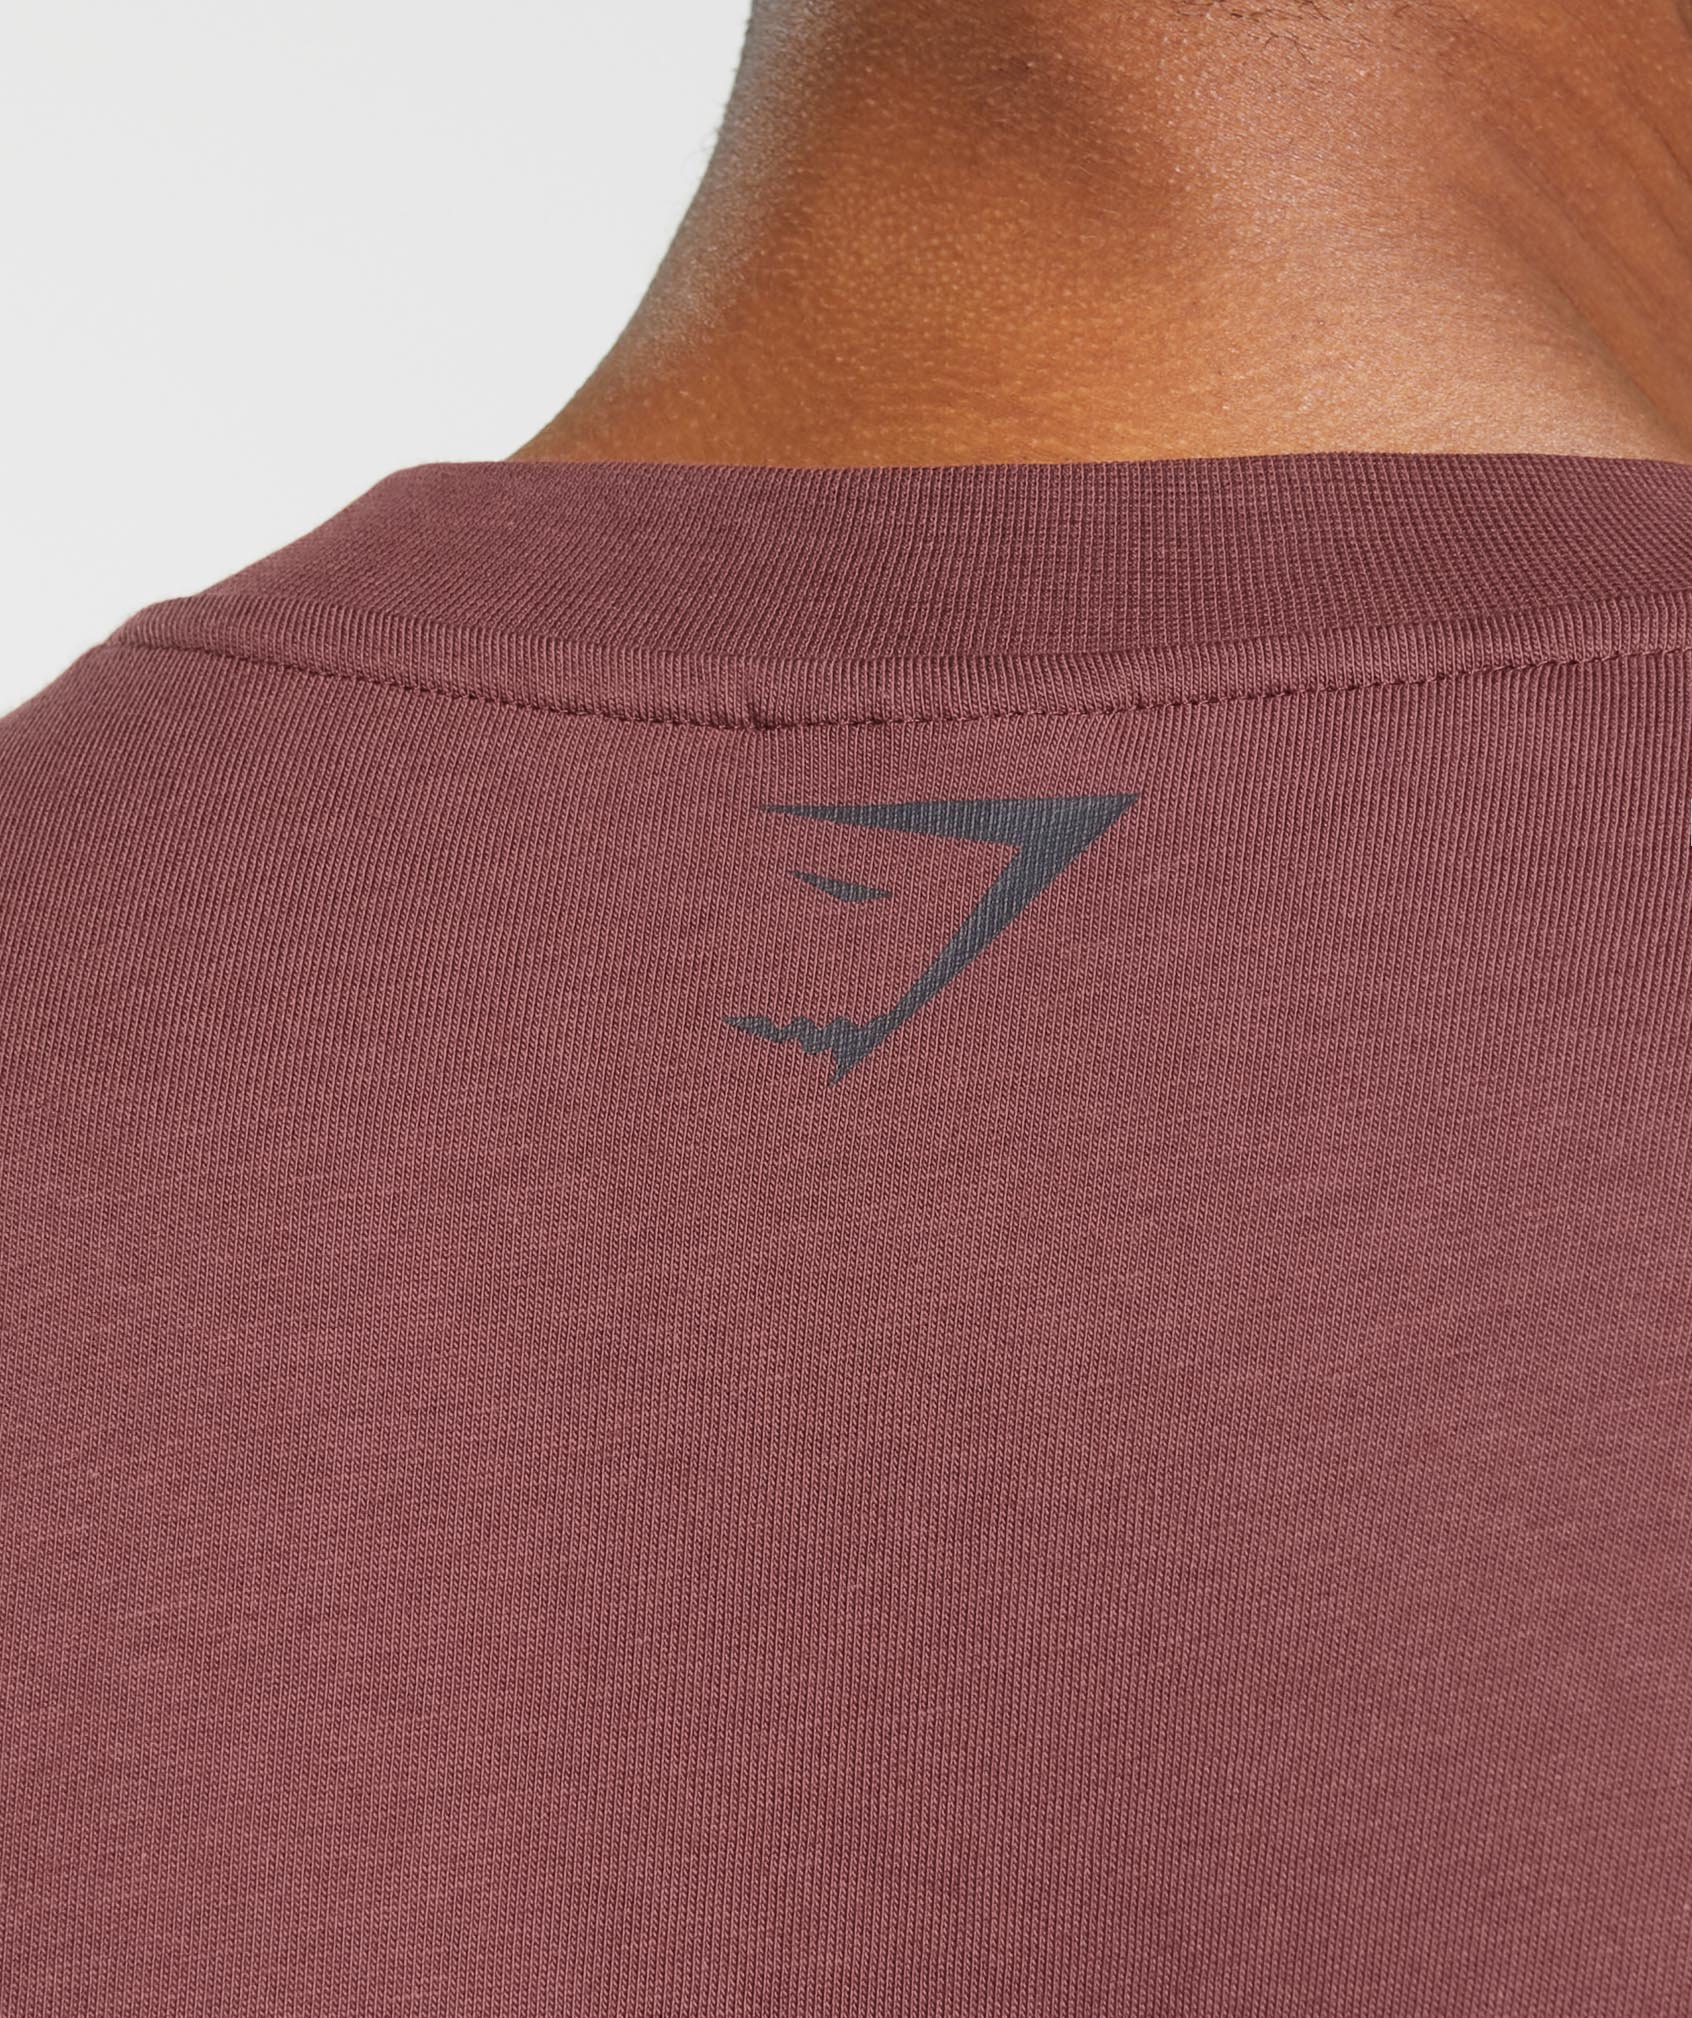 Conditioning Graphic T-Shirt in Burgundy Brown - view 5